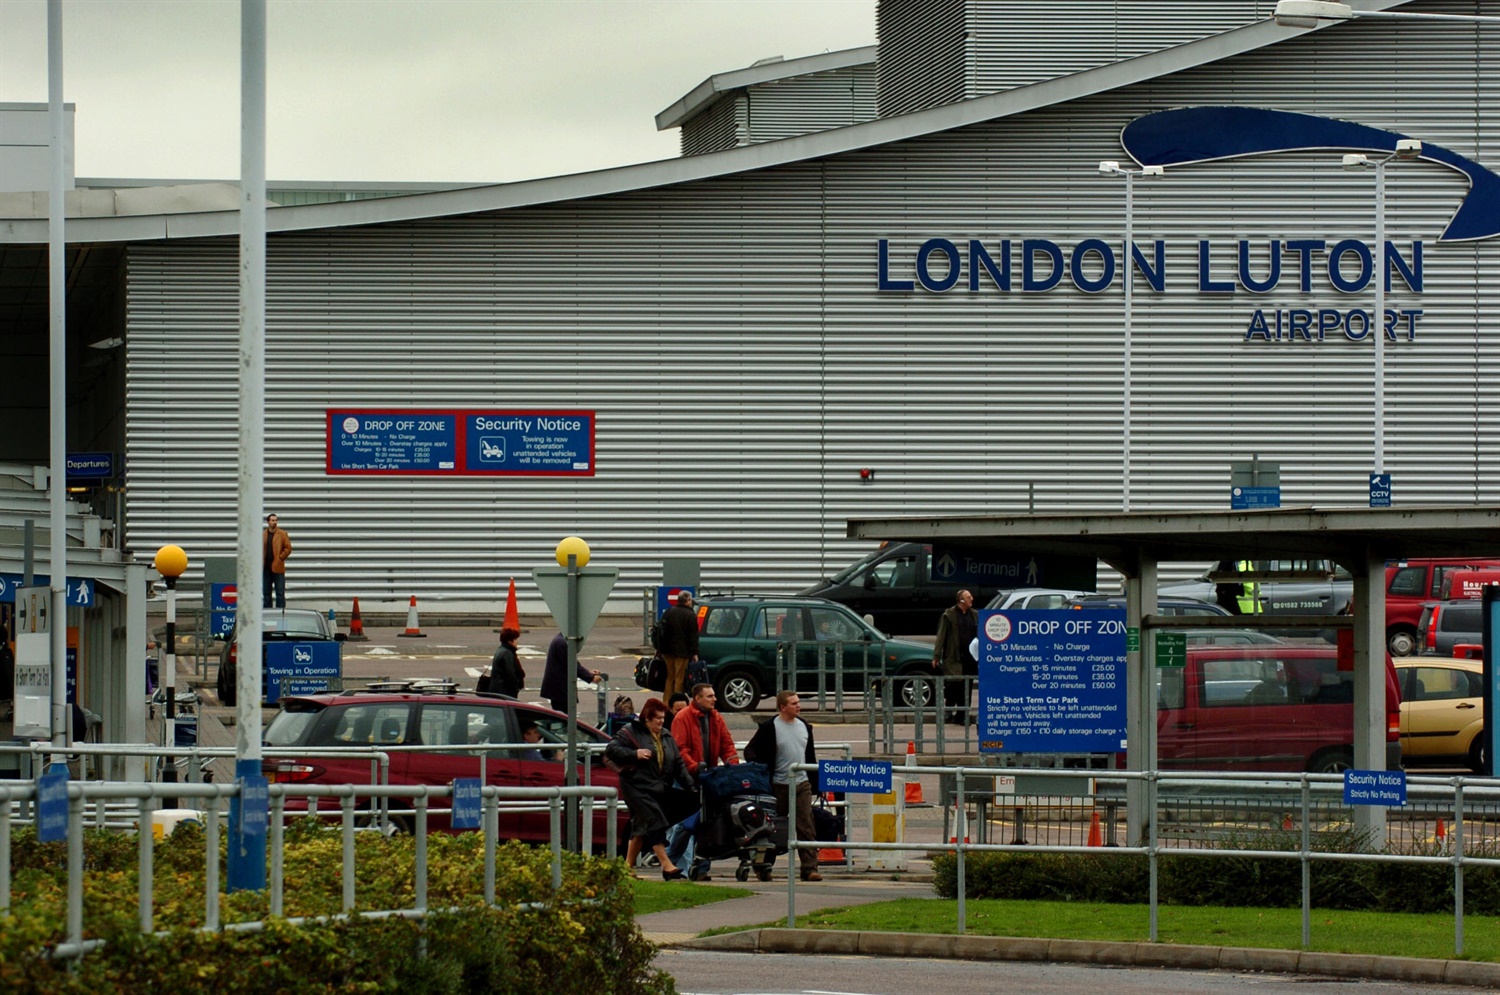 Luton airport calls for express train services in new East Midlands franchise